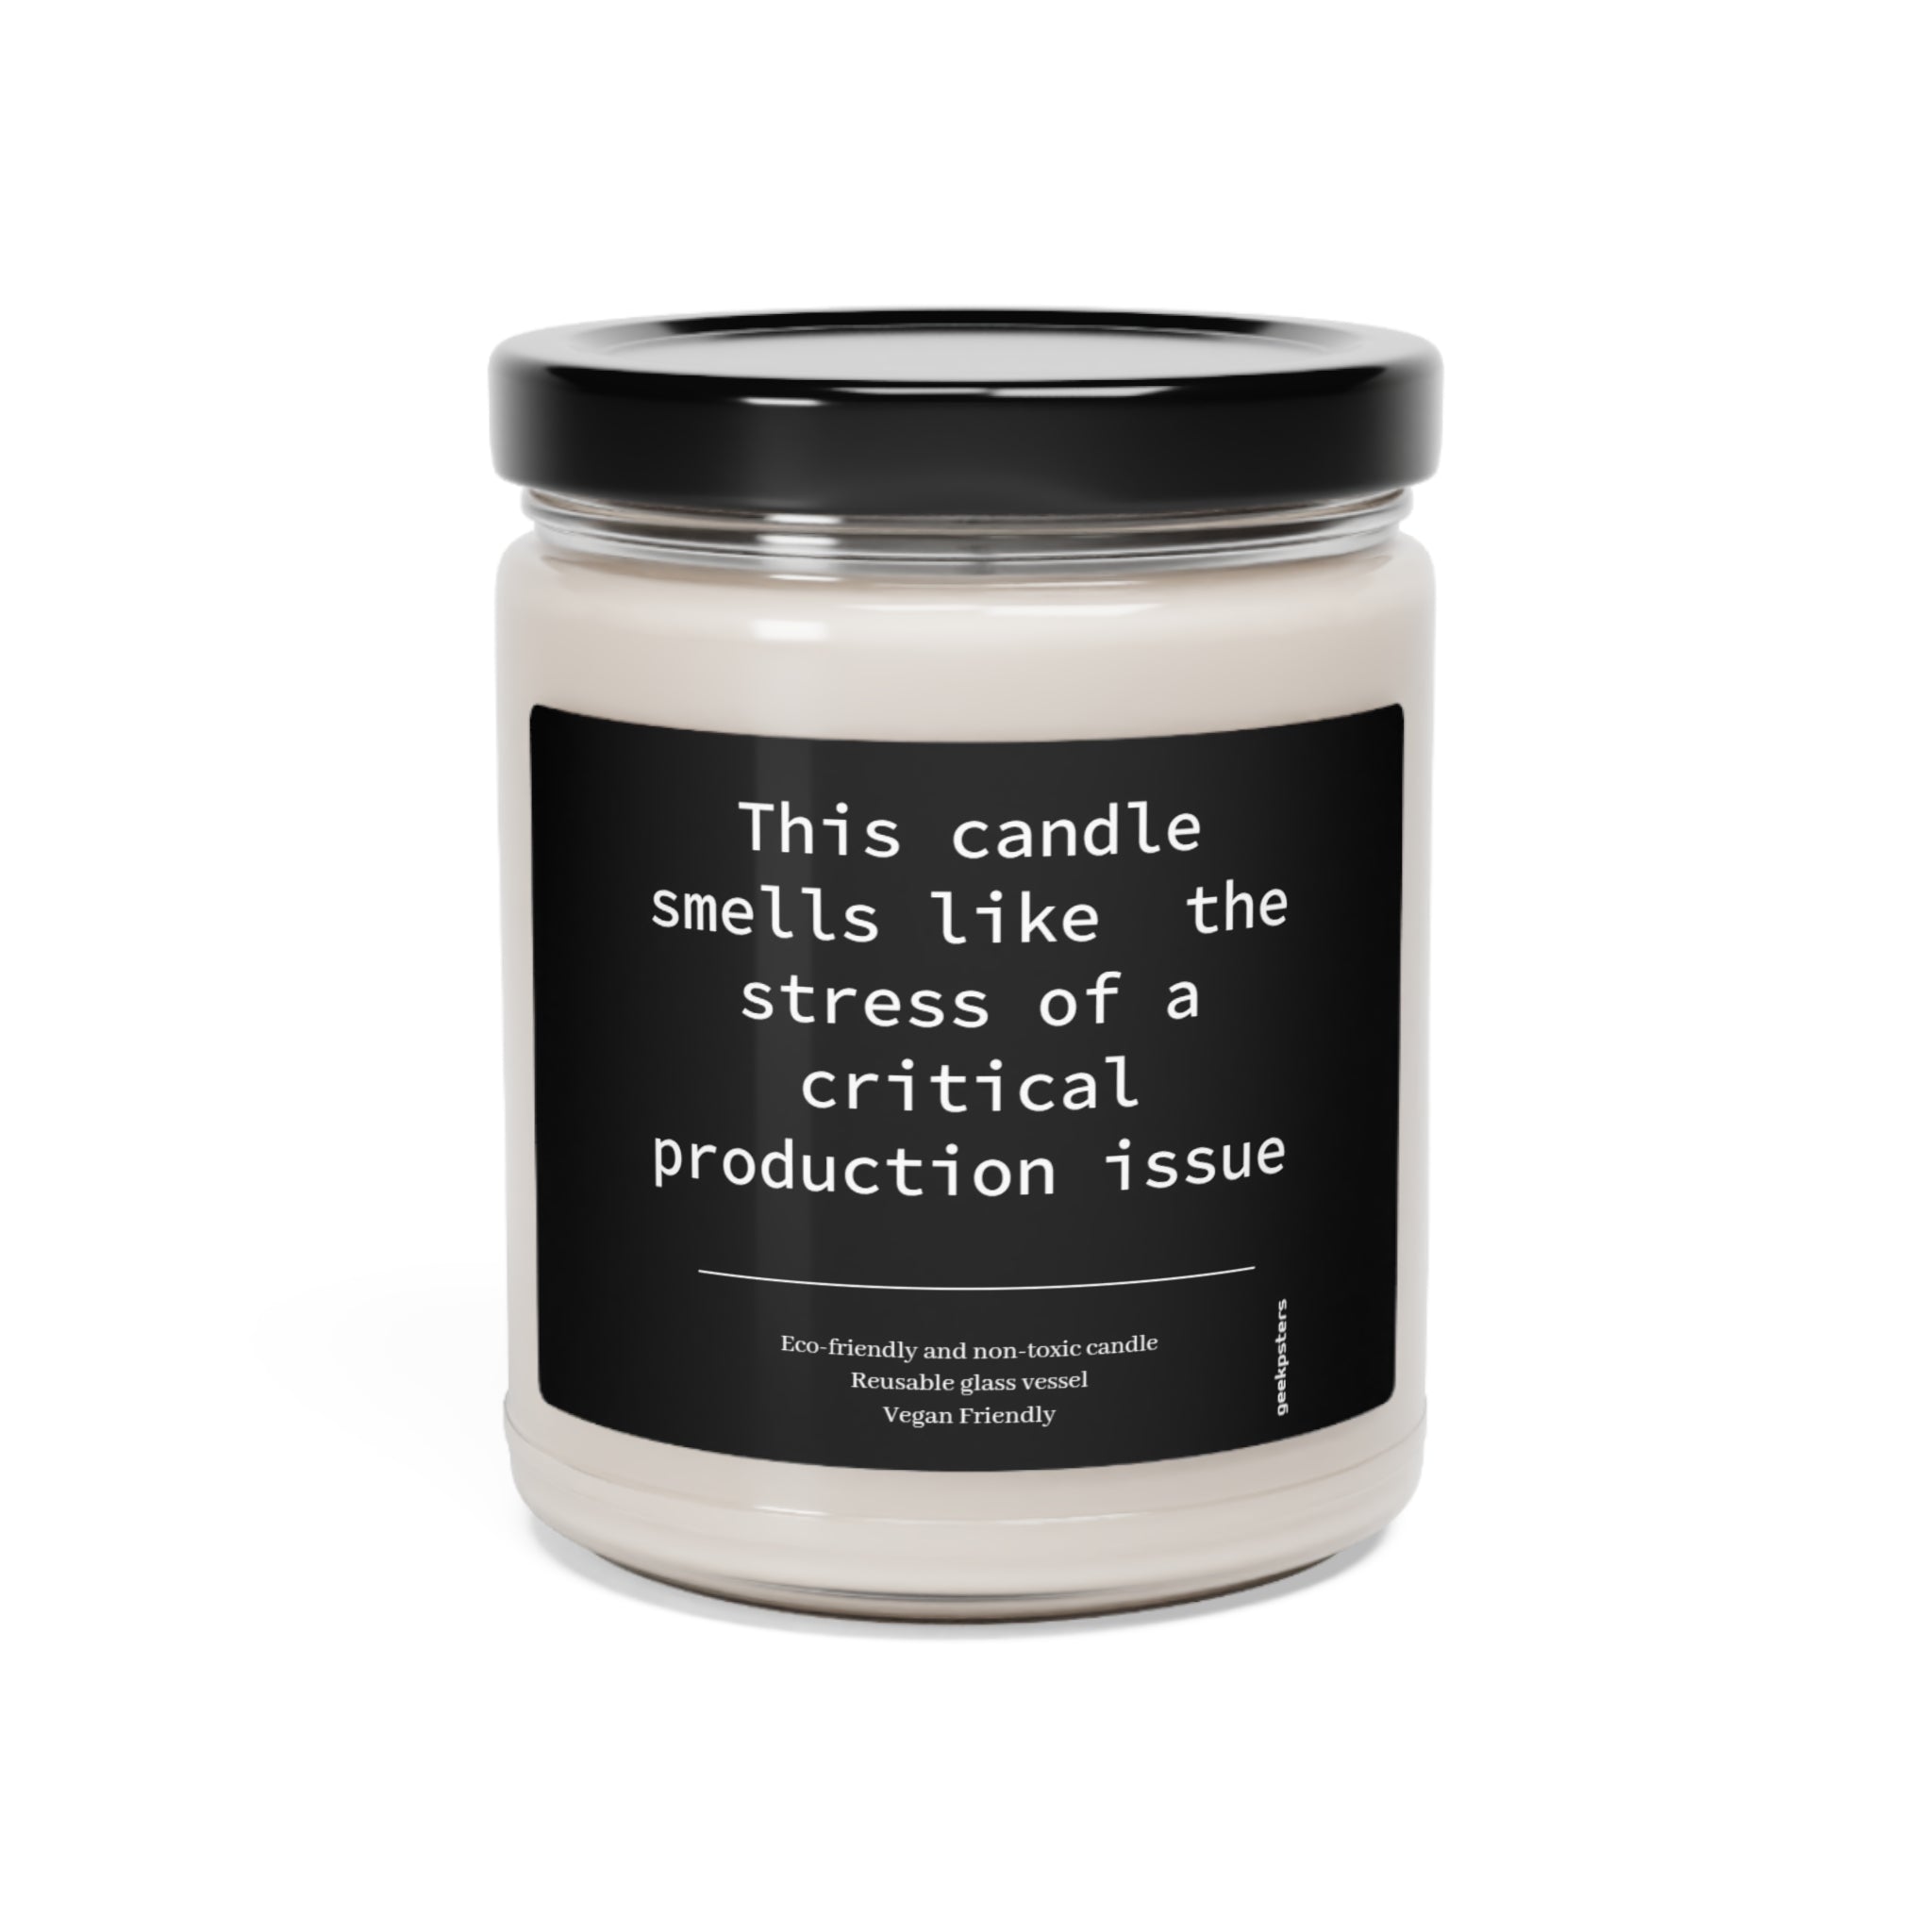 A scented soy candle in a clear glass jar with a black label reading "This Candle Smells Like the Stress of a Critical Production Issue," labeled as eco-friendly and vegan friendly.